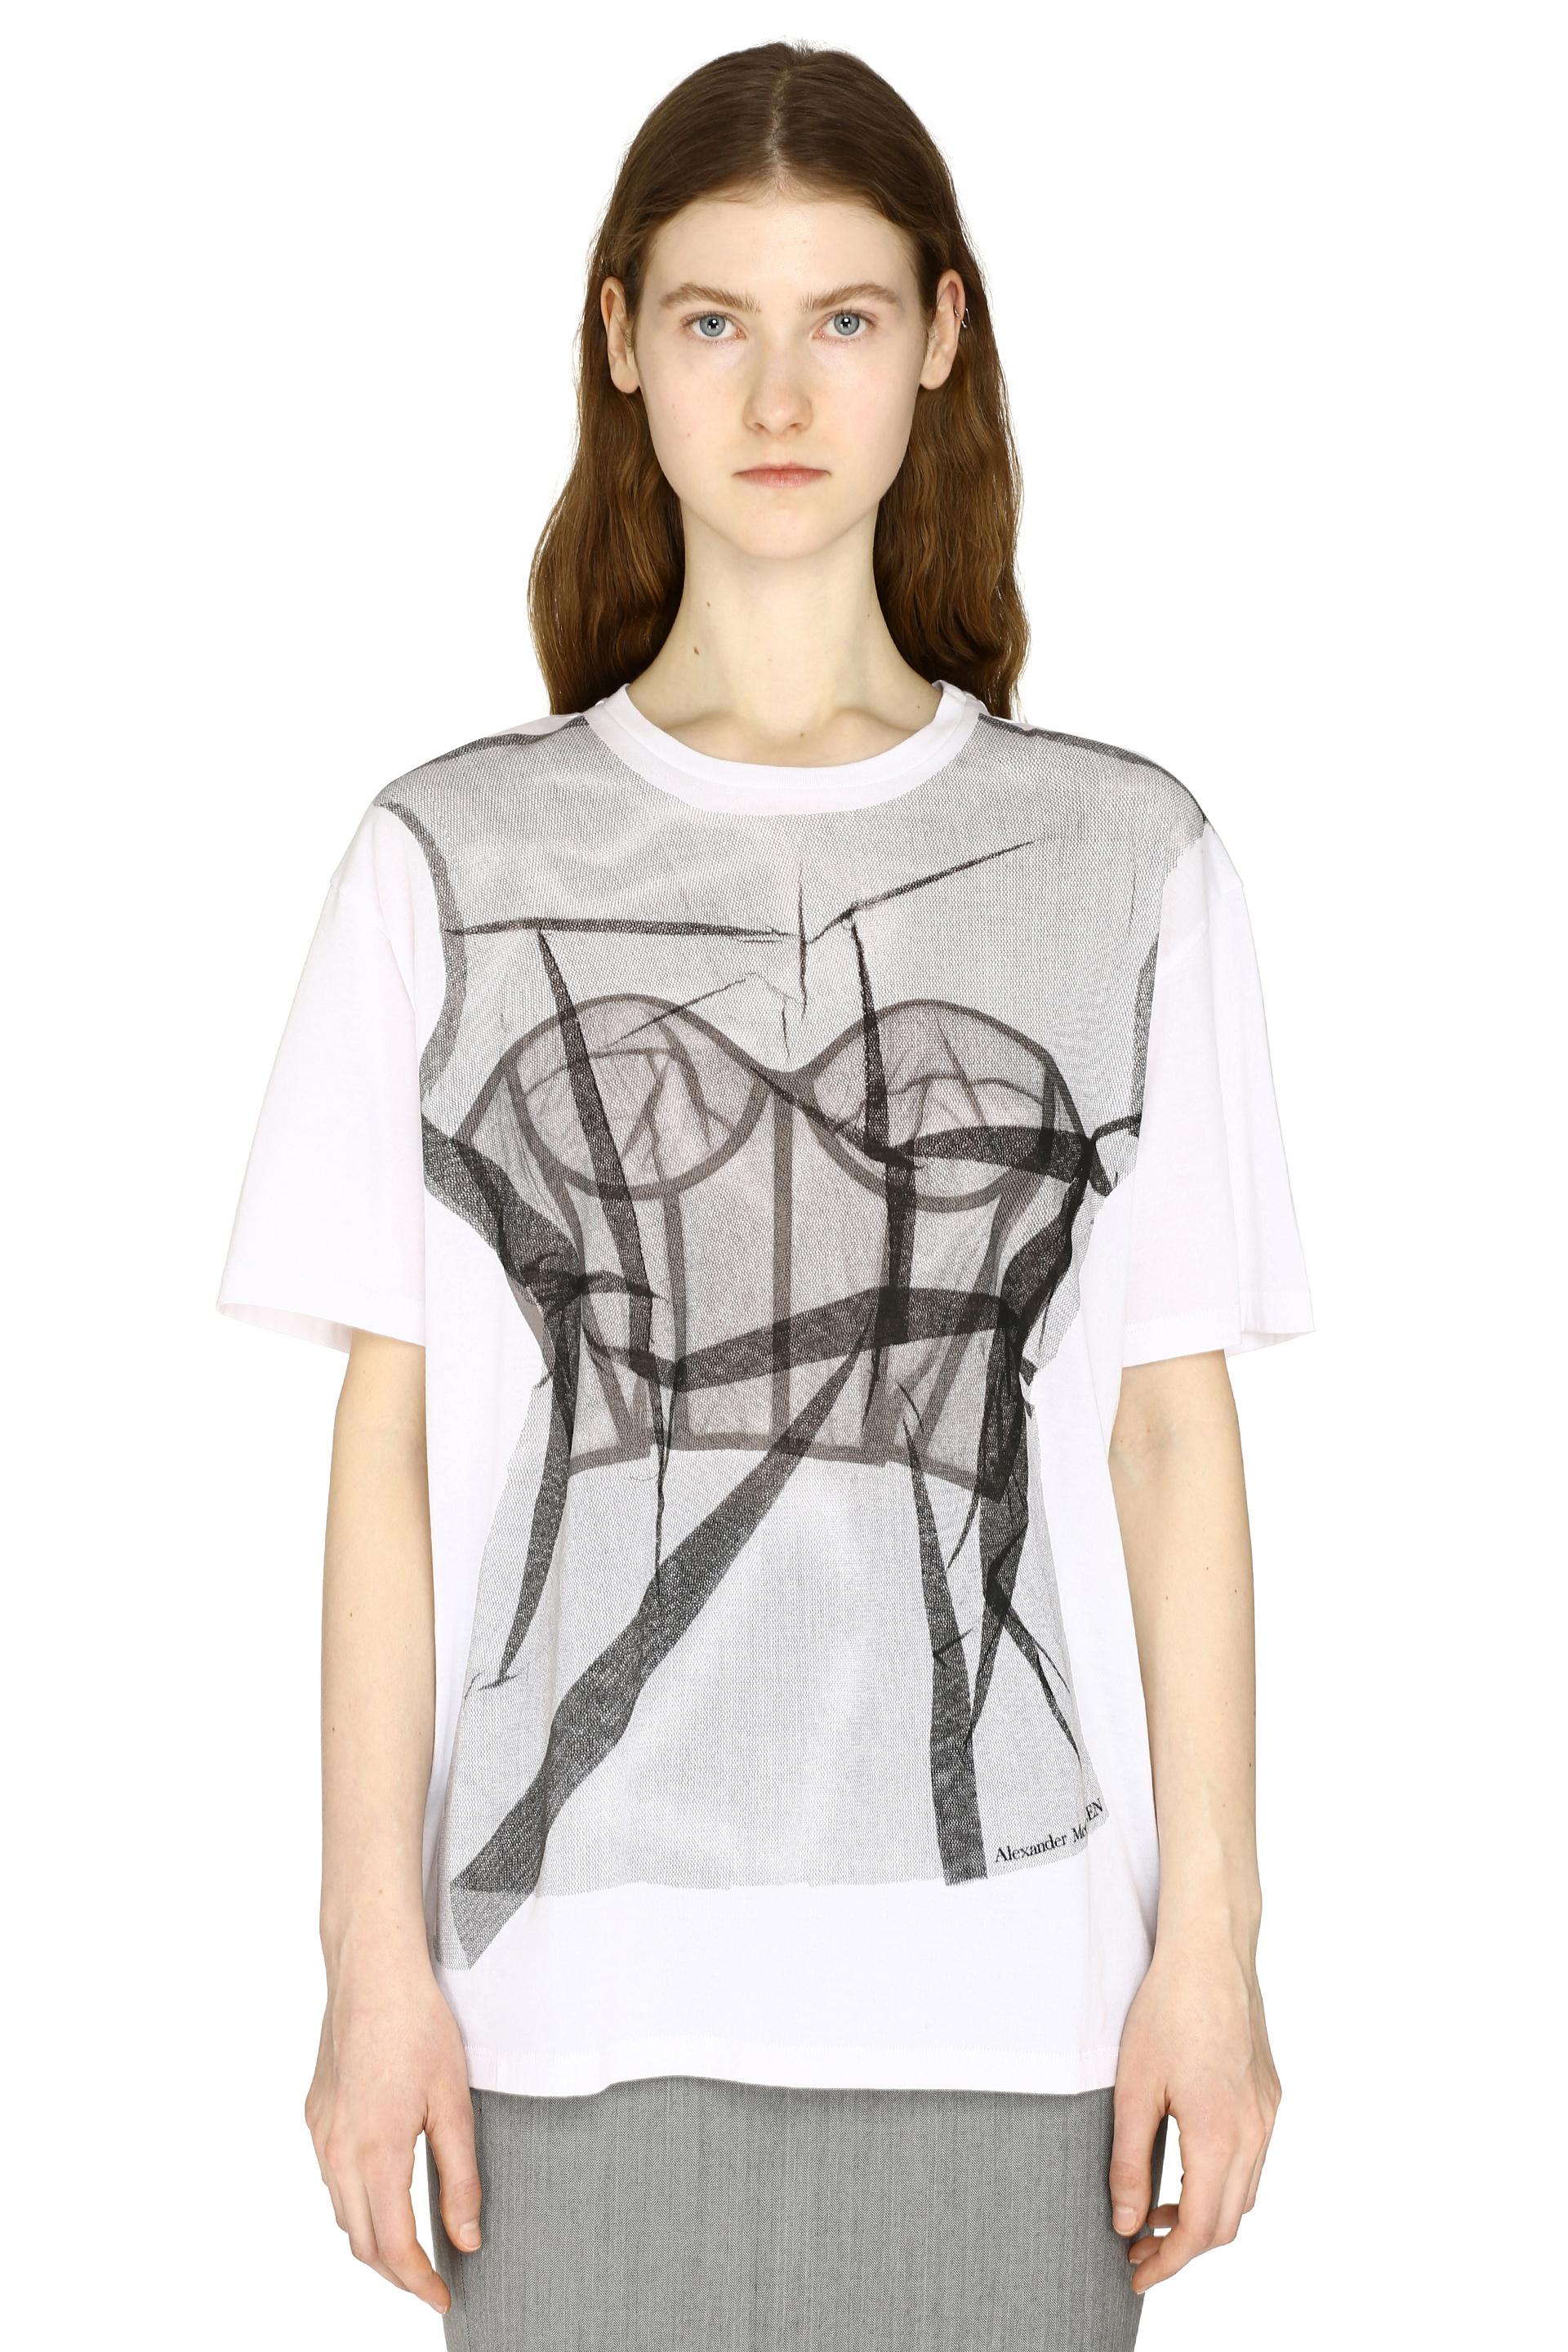 Alexander McQueen Tulle Printed Cotton T-shirt in White - Lyst